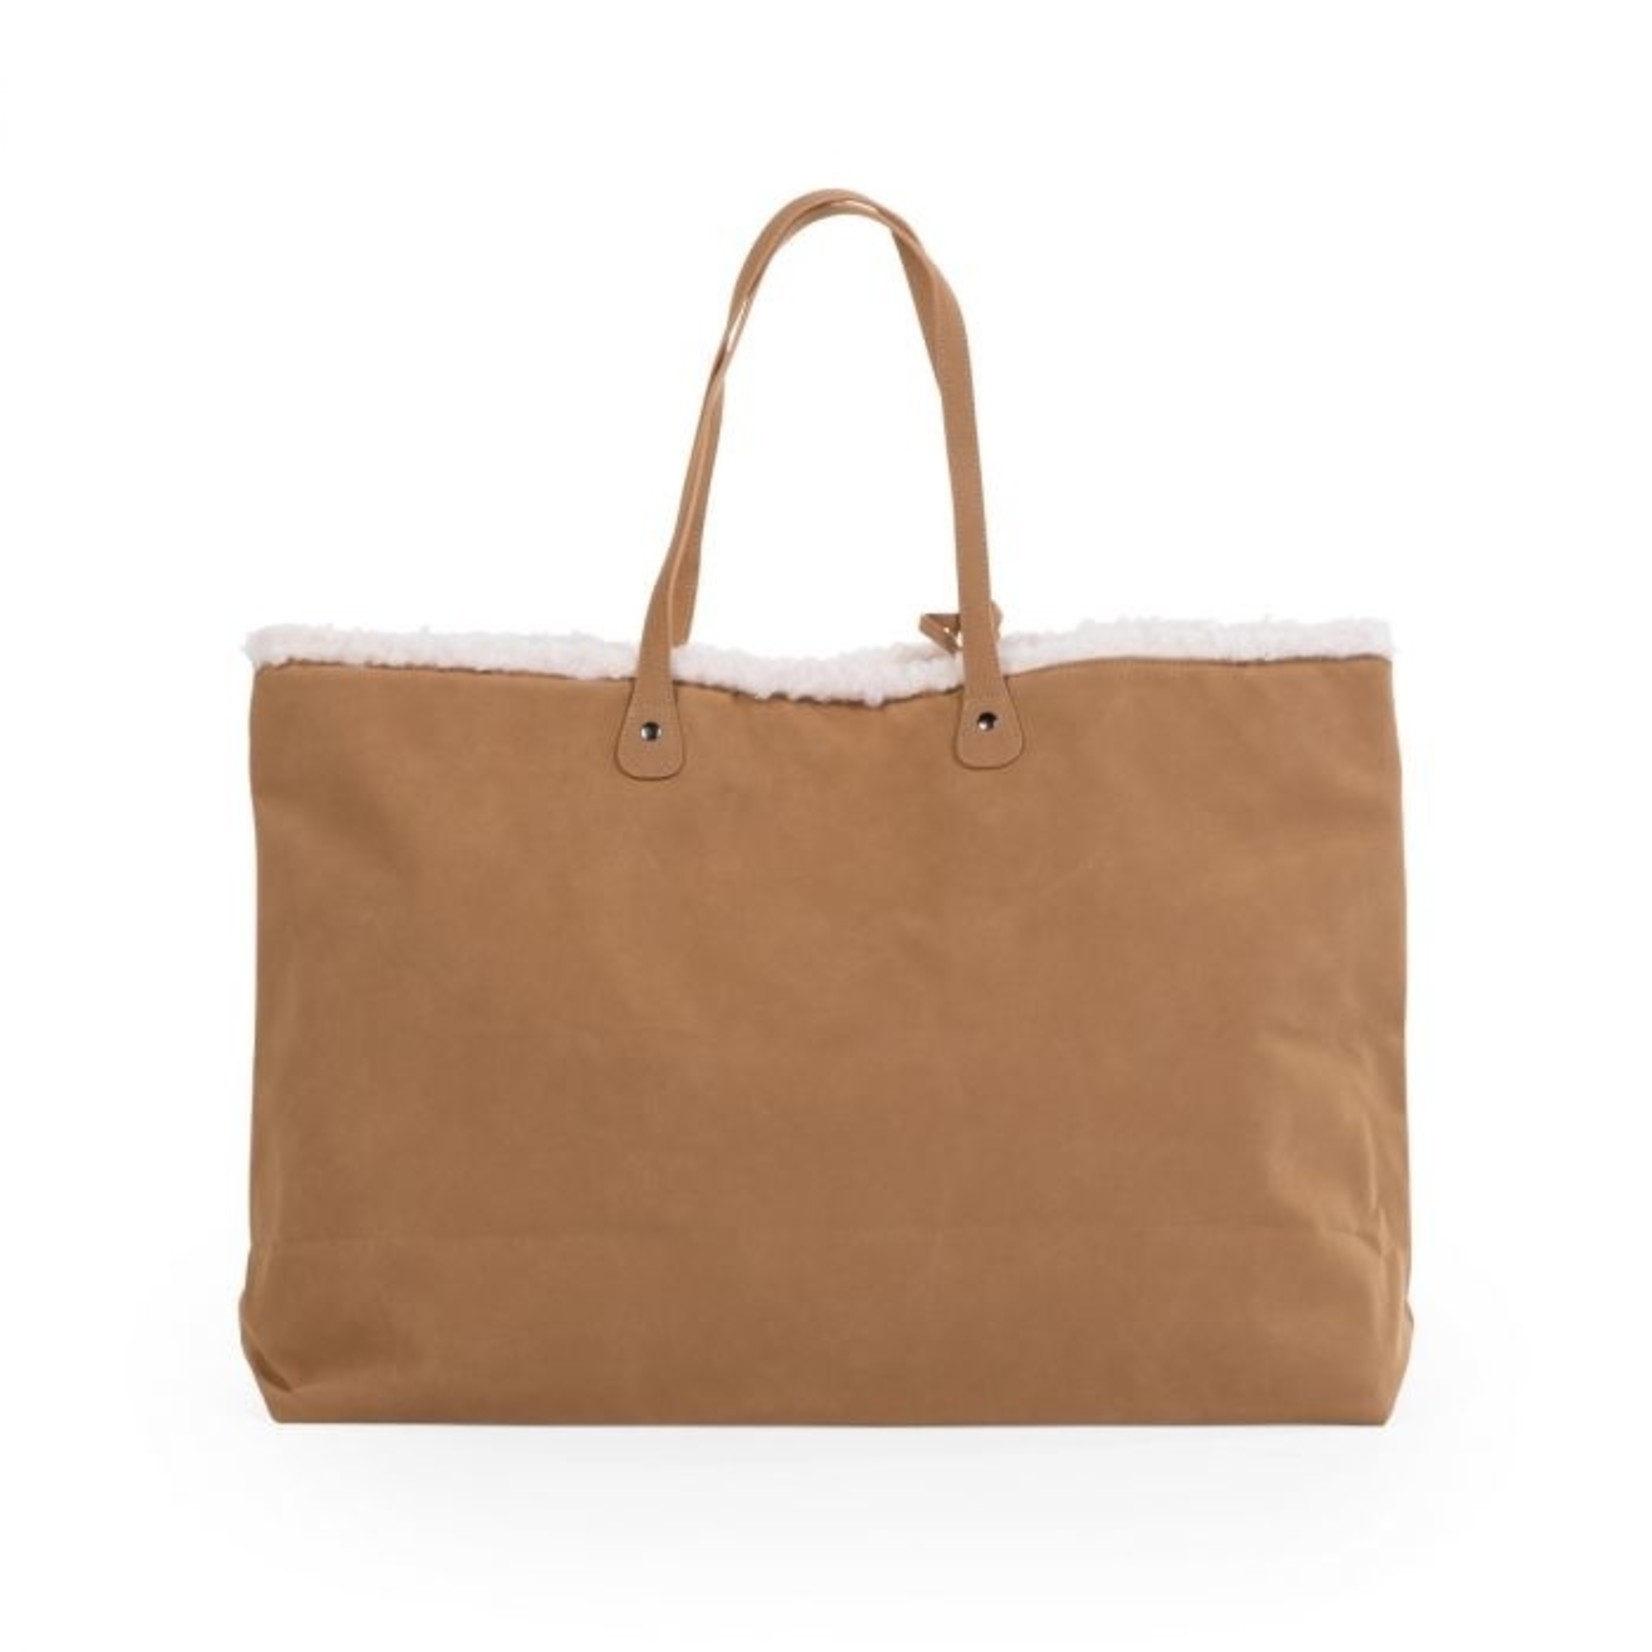 Family bag - suede look